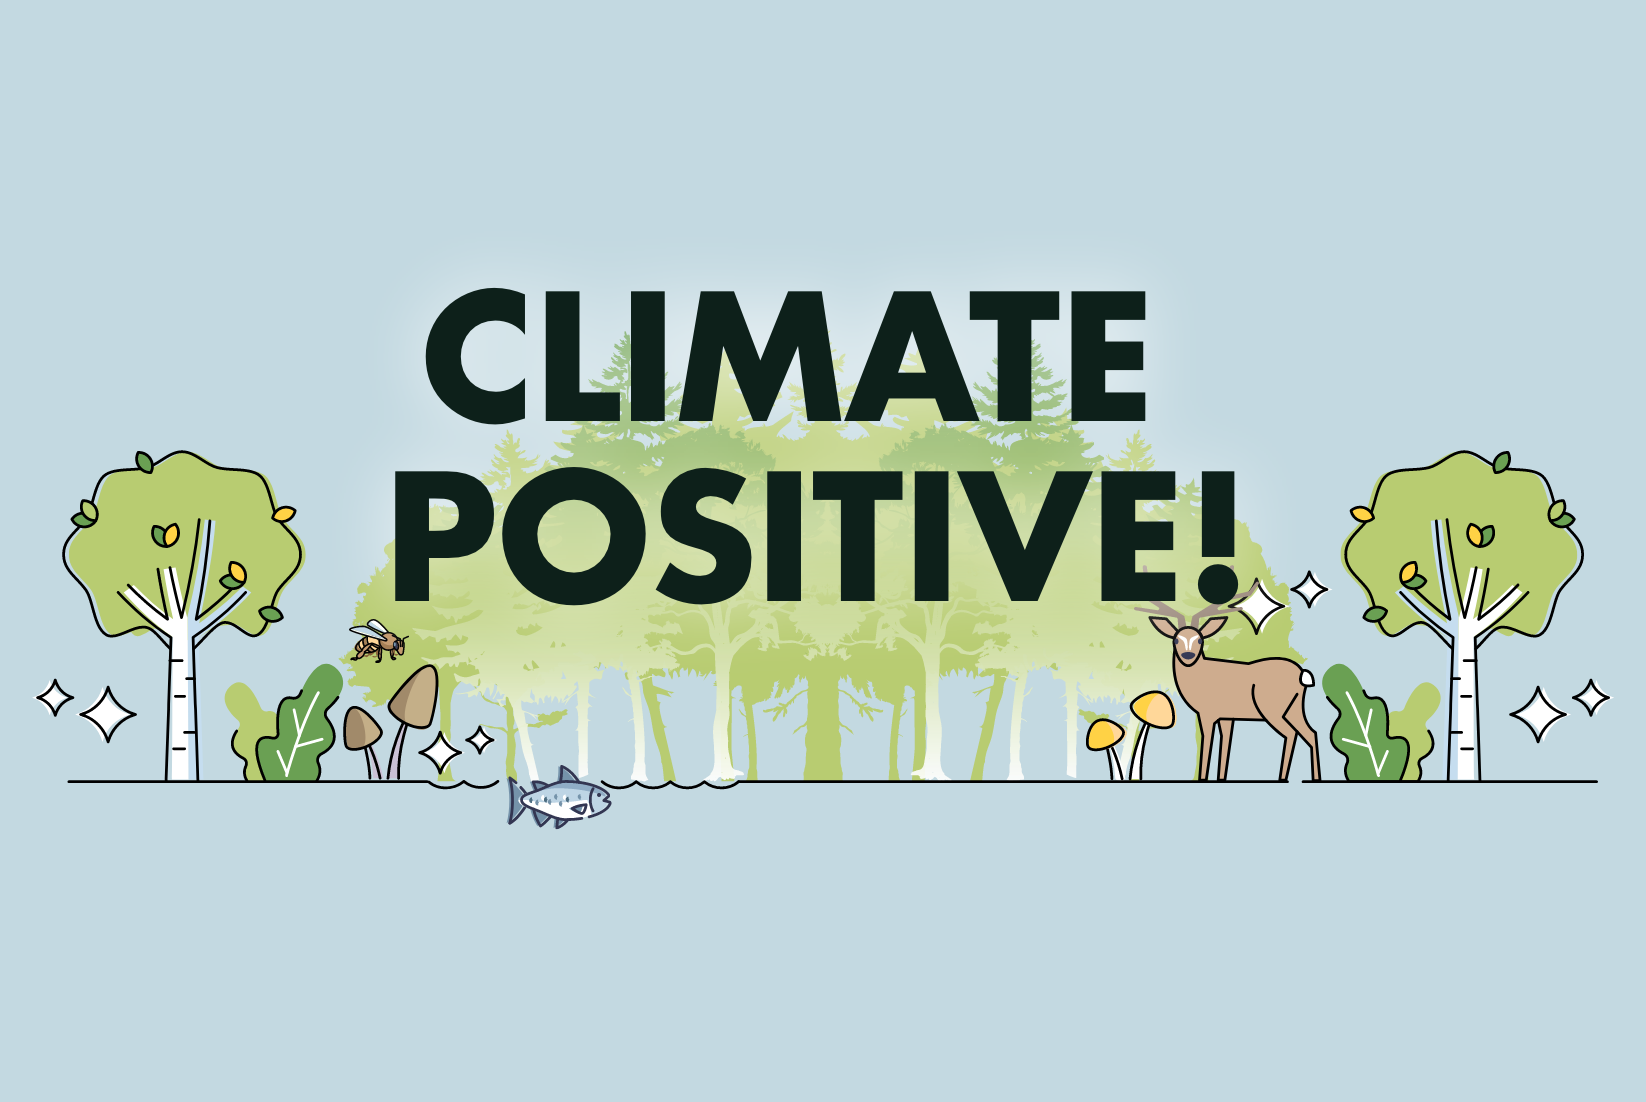 We're Climate Positive